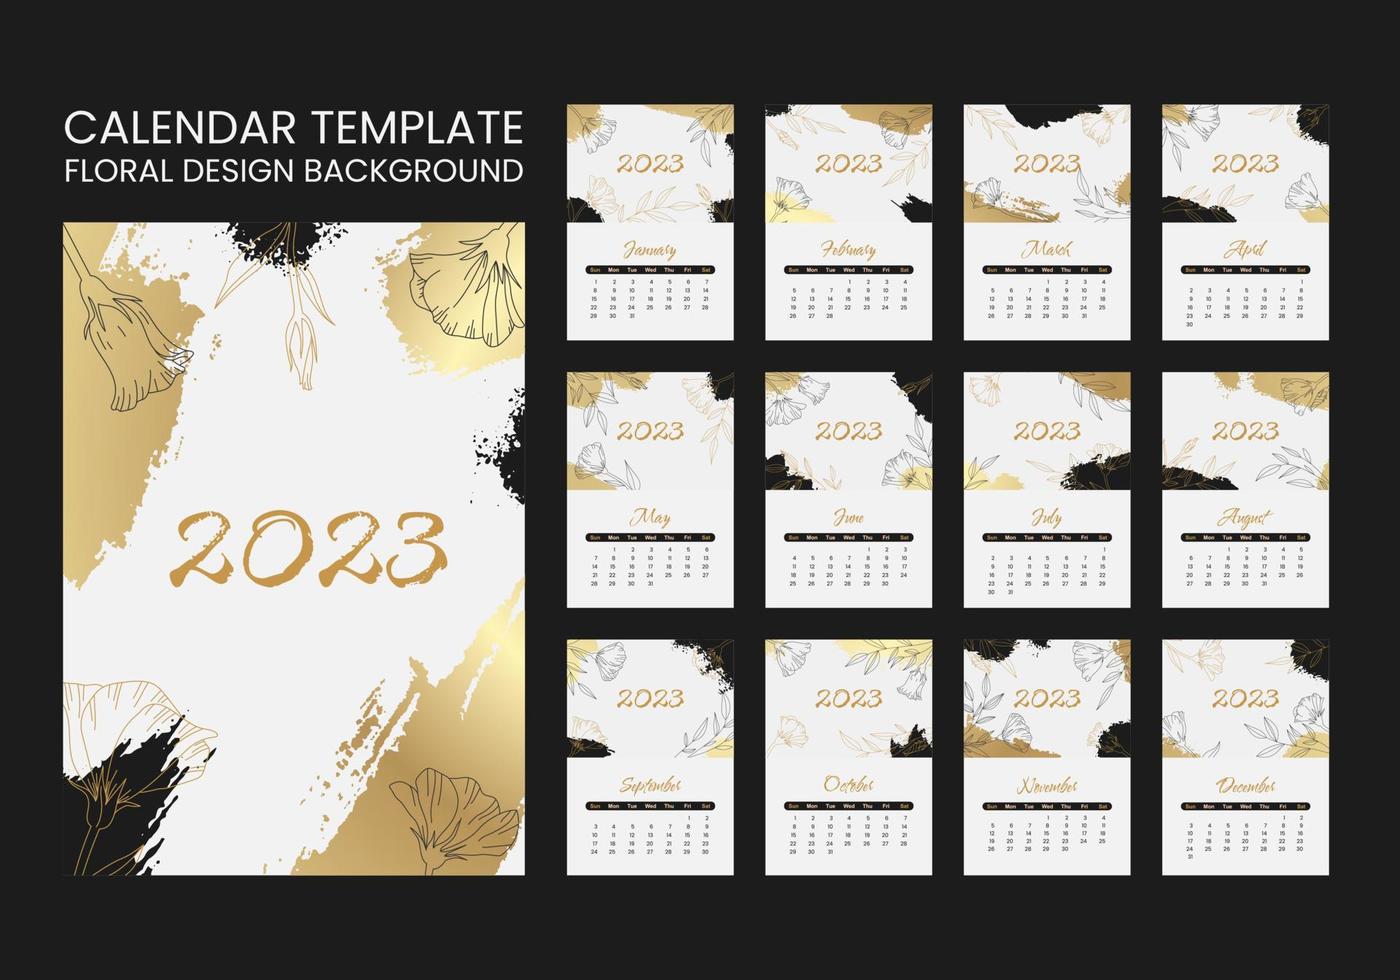 Trendy abstract background with brush paint shapes and flower element in luxury black and gold colors. 2023 Calendar year vector illustration poster. Monthly vertical calendar template